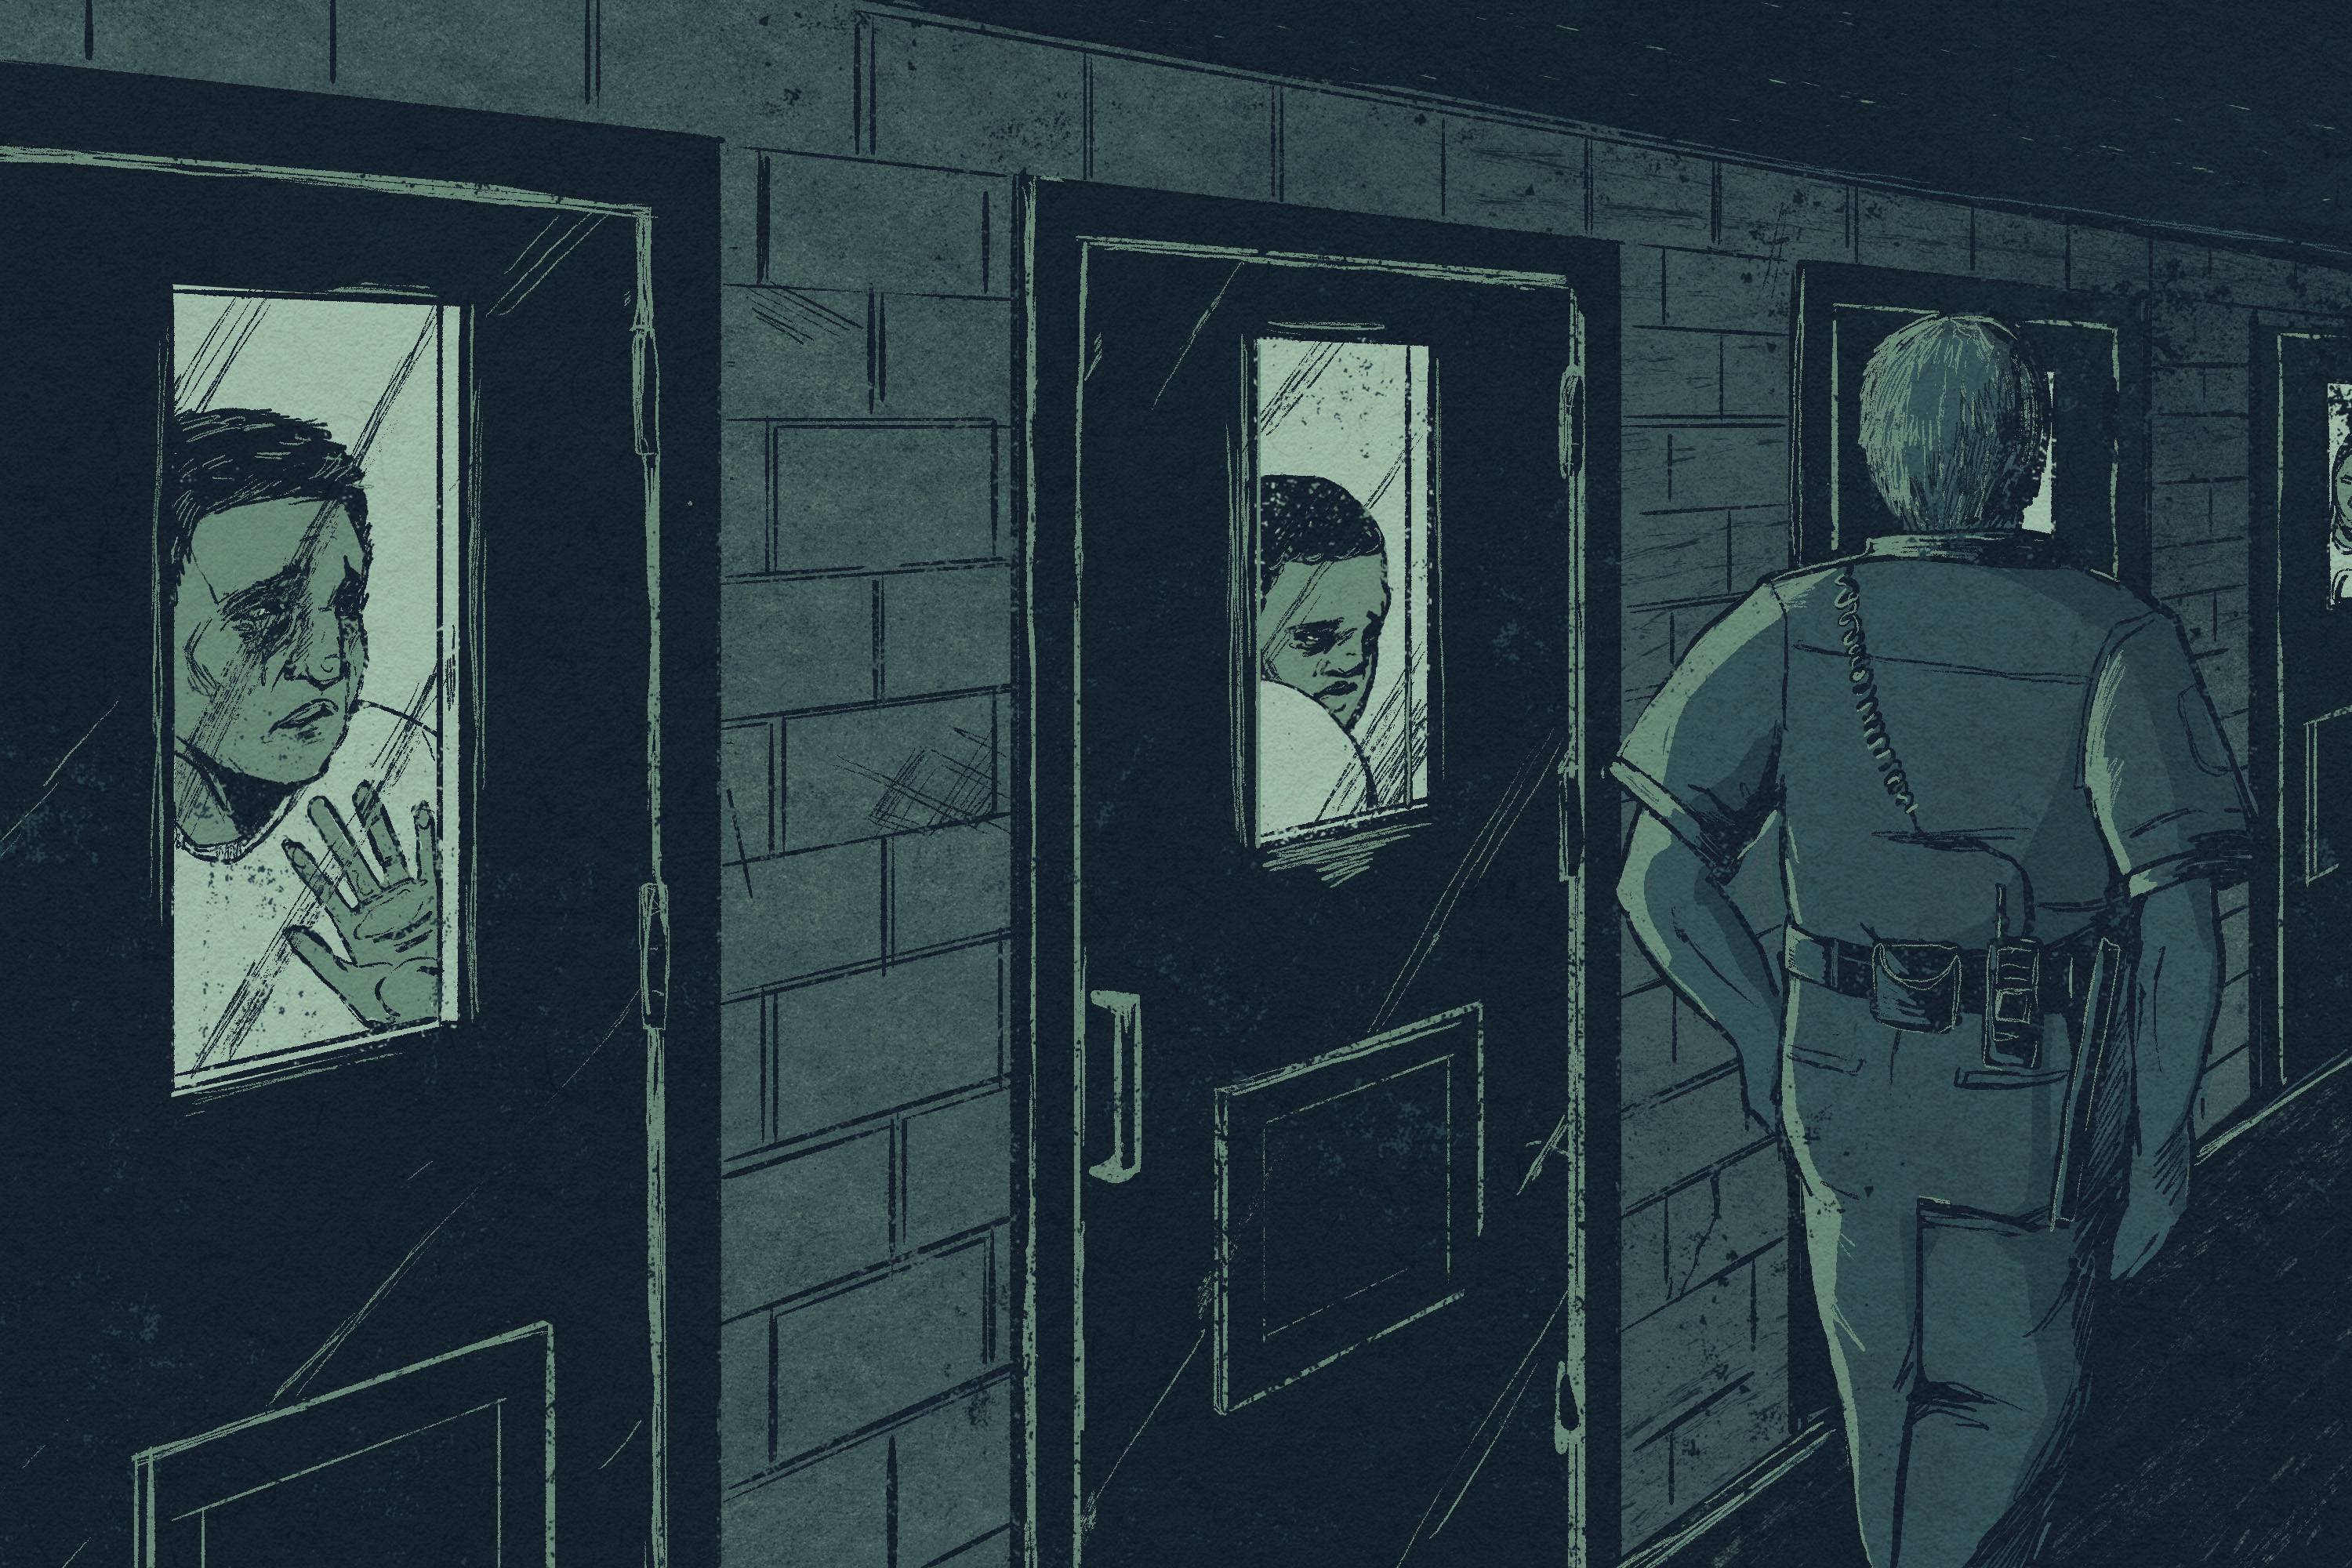 Illustration shows hallway of detention facility with detention center staff walking away toward the right, back to us. There are two cell doors with narrow windows in the foreground left and middle, with upset men standing looking through the windows.